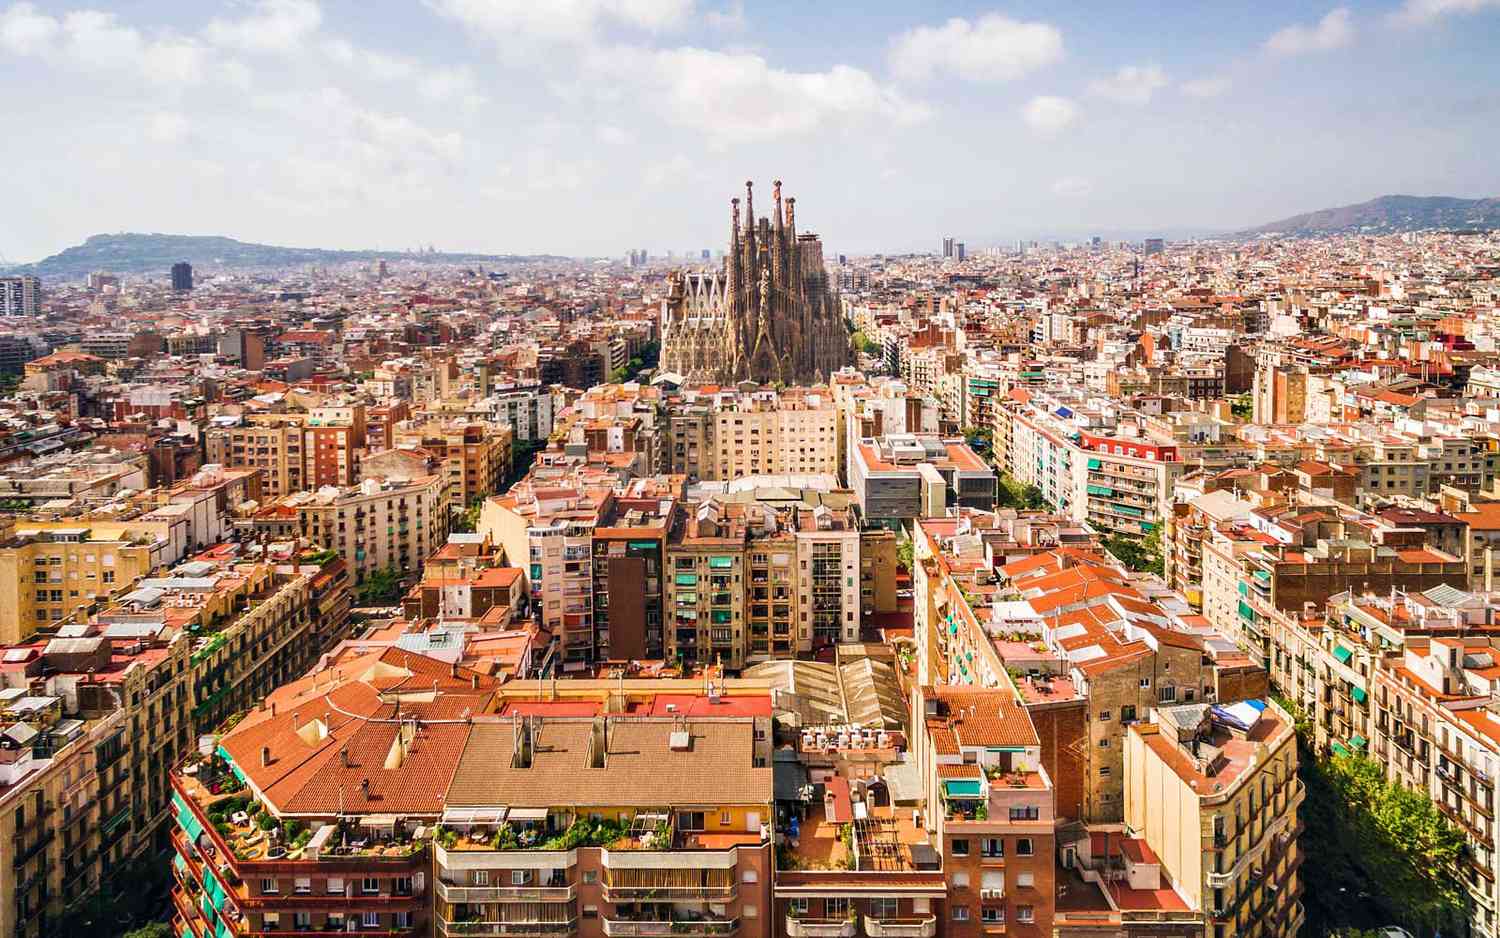 Where To Stay In Barcelona – A Guide To The Best Neighborhoods